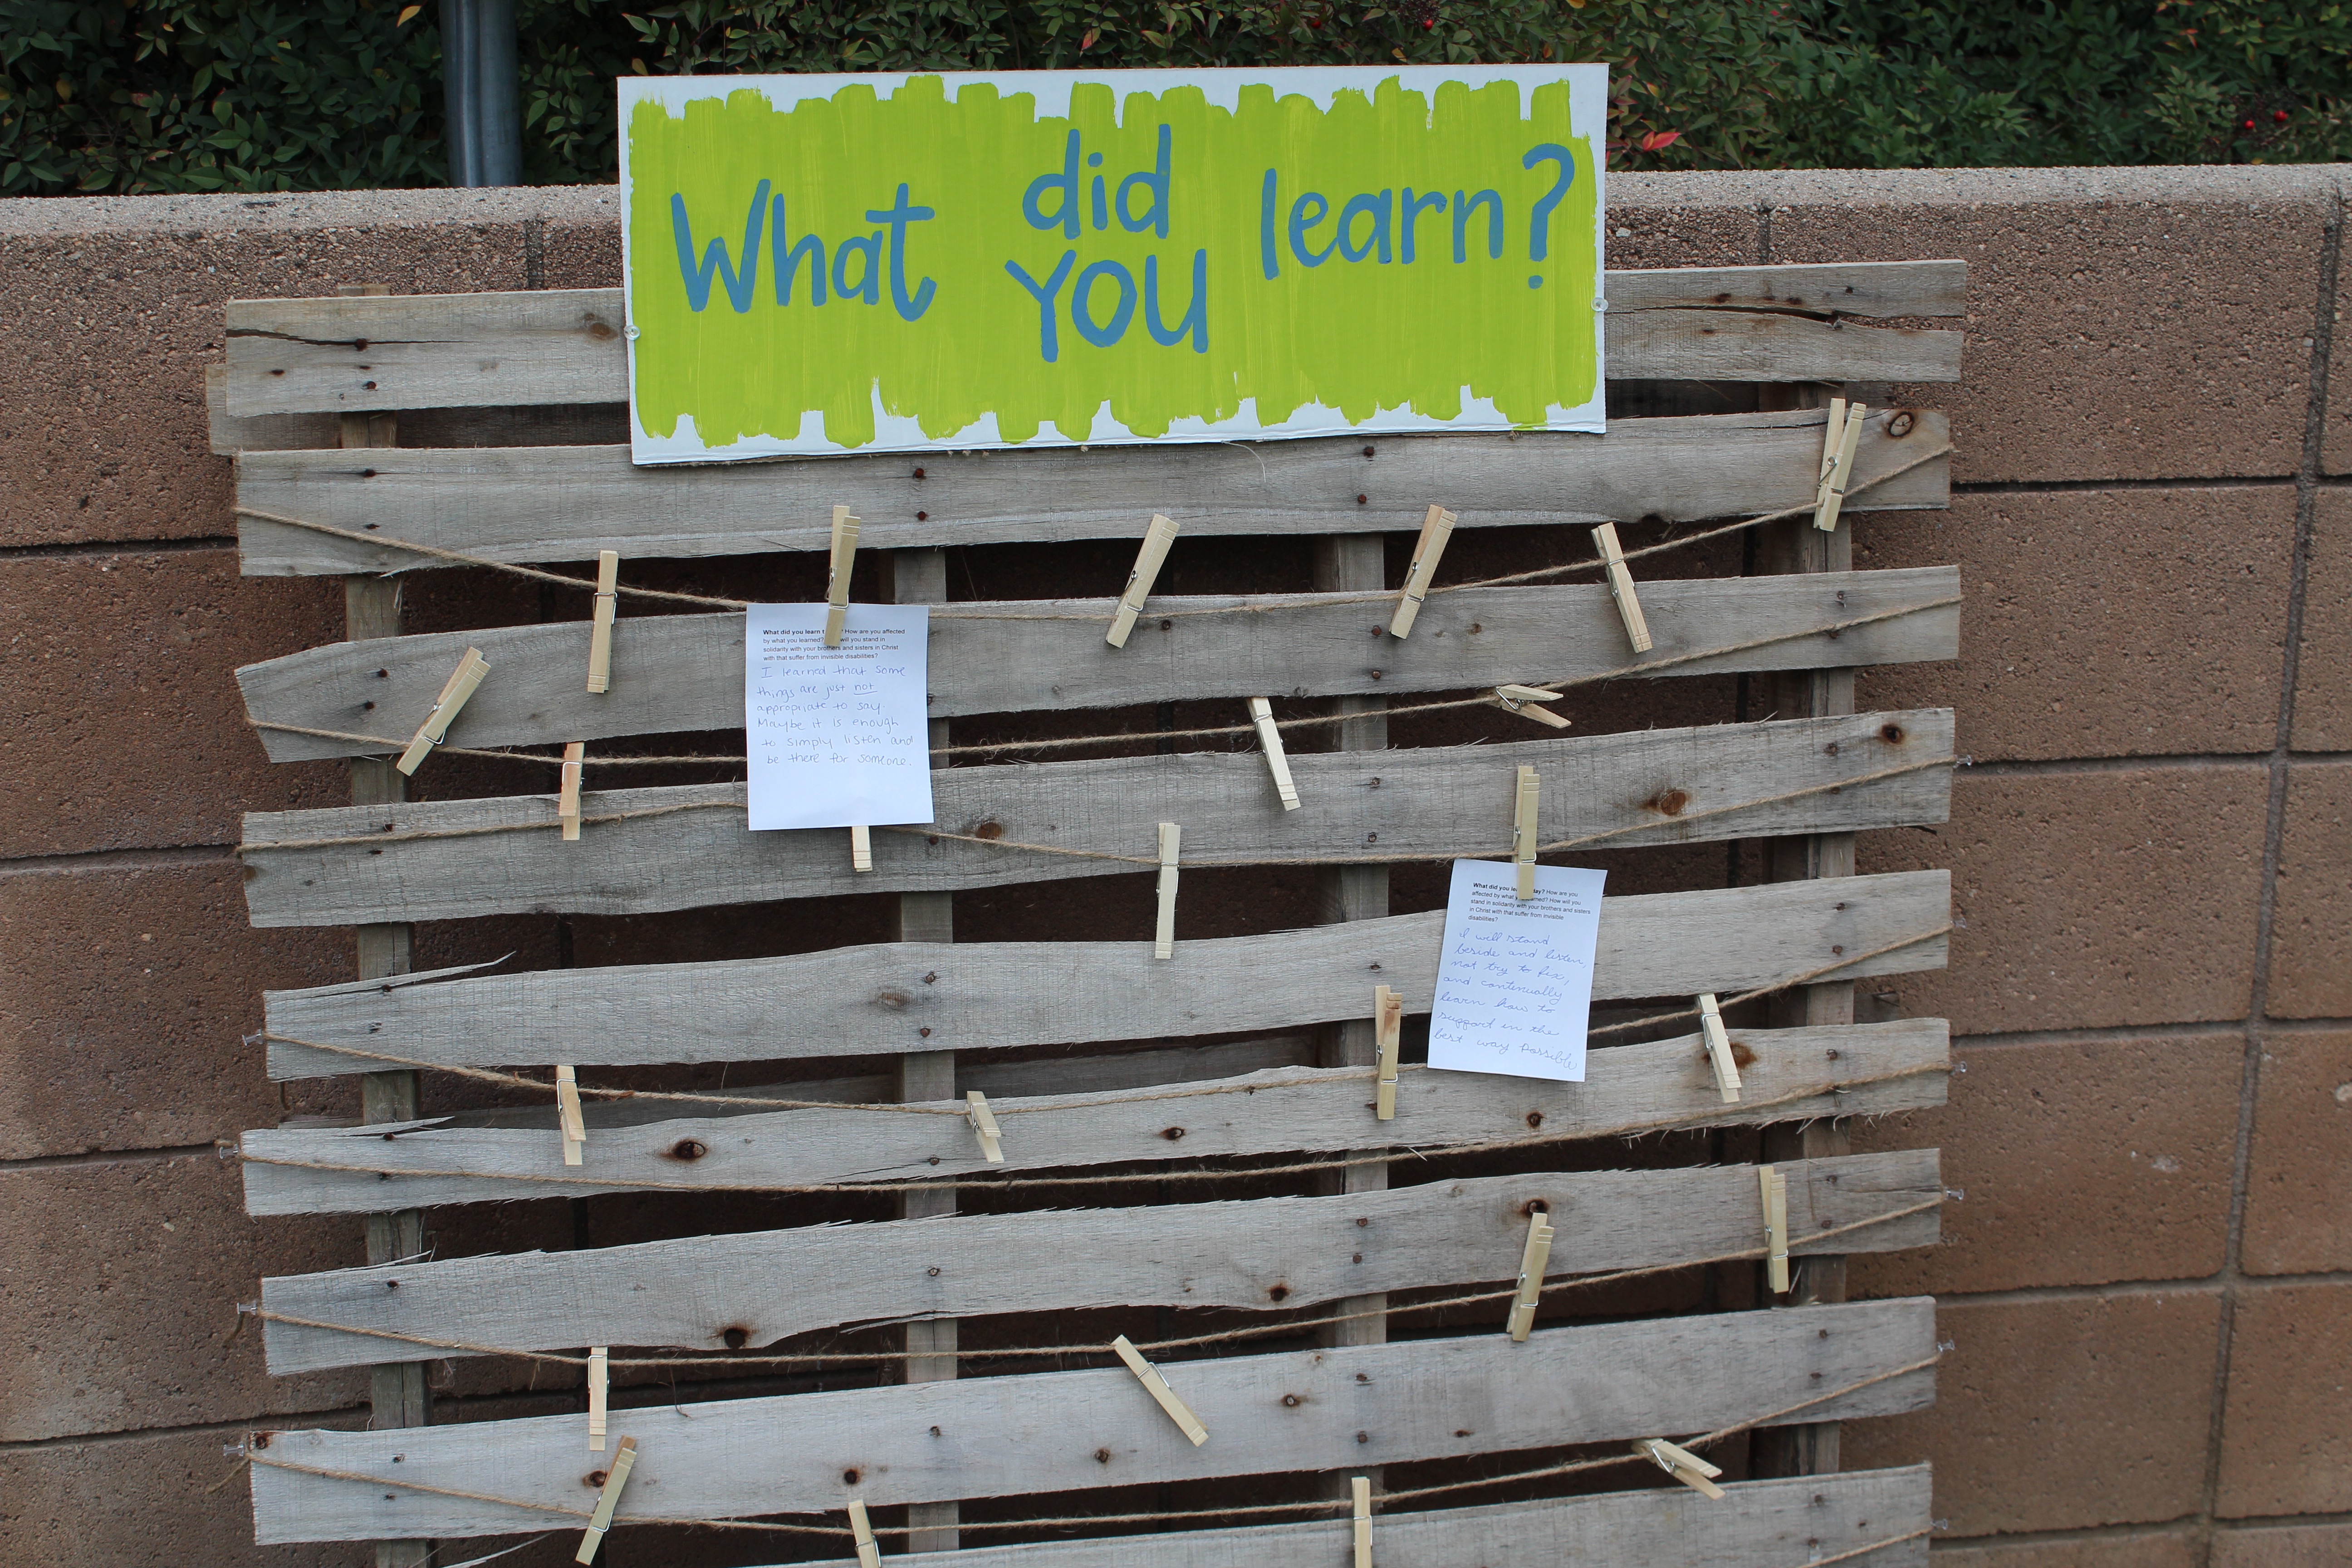 Board for visitors to pin answers to the question "What did you learn?"